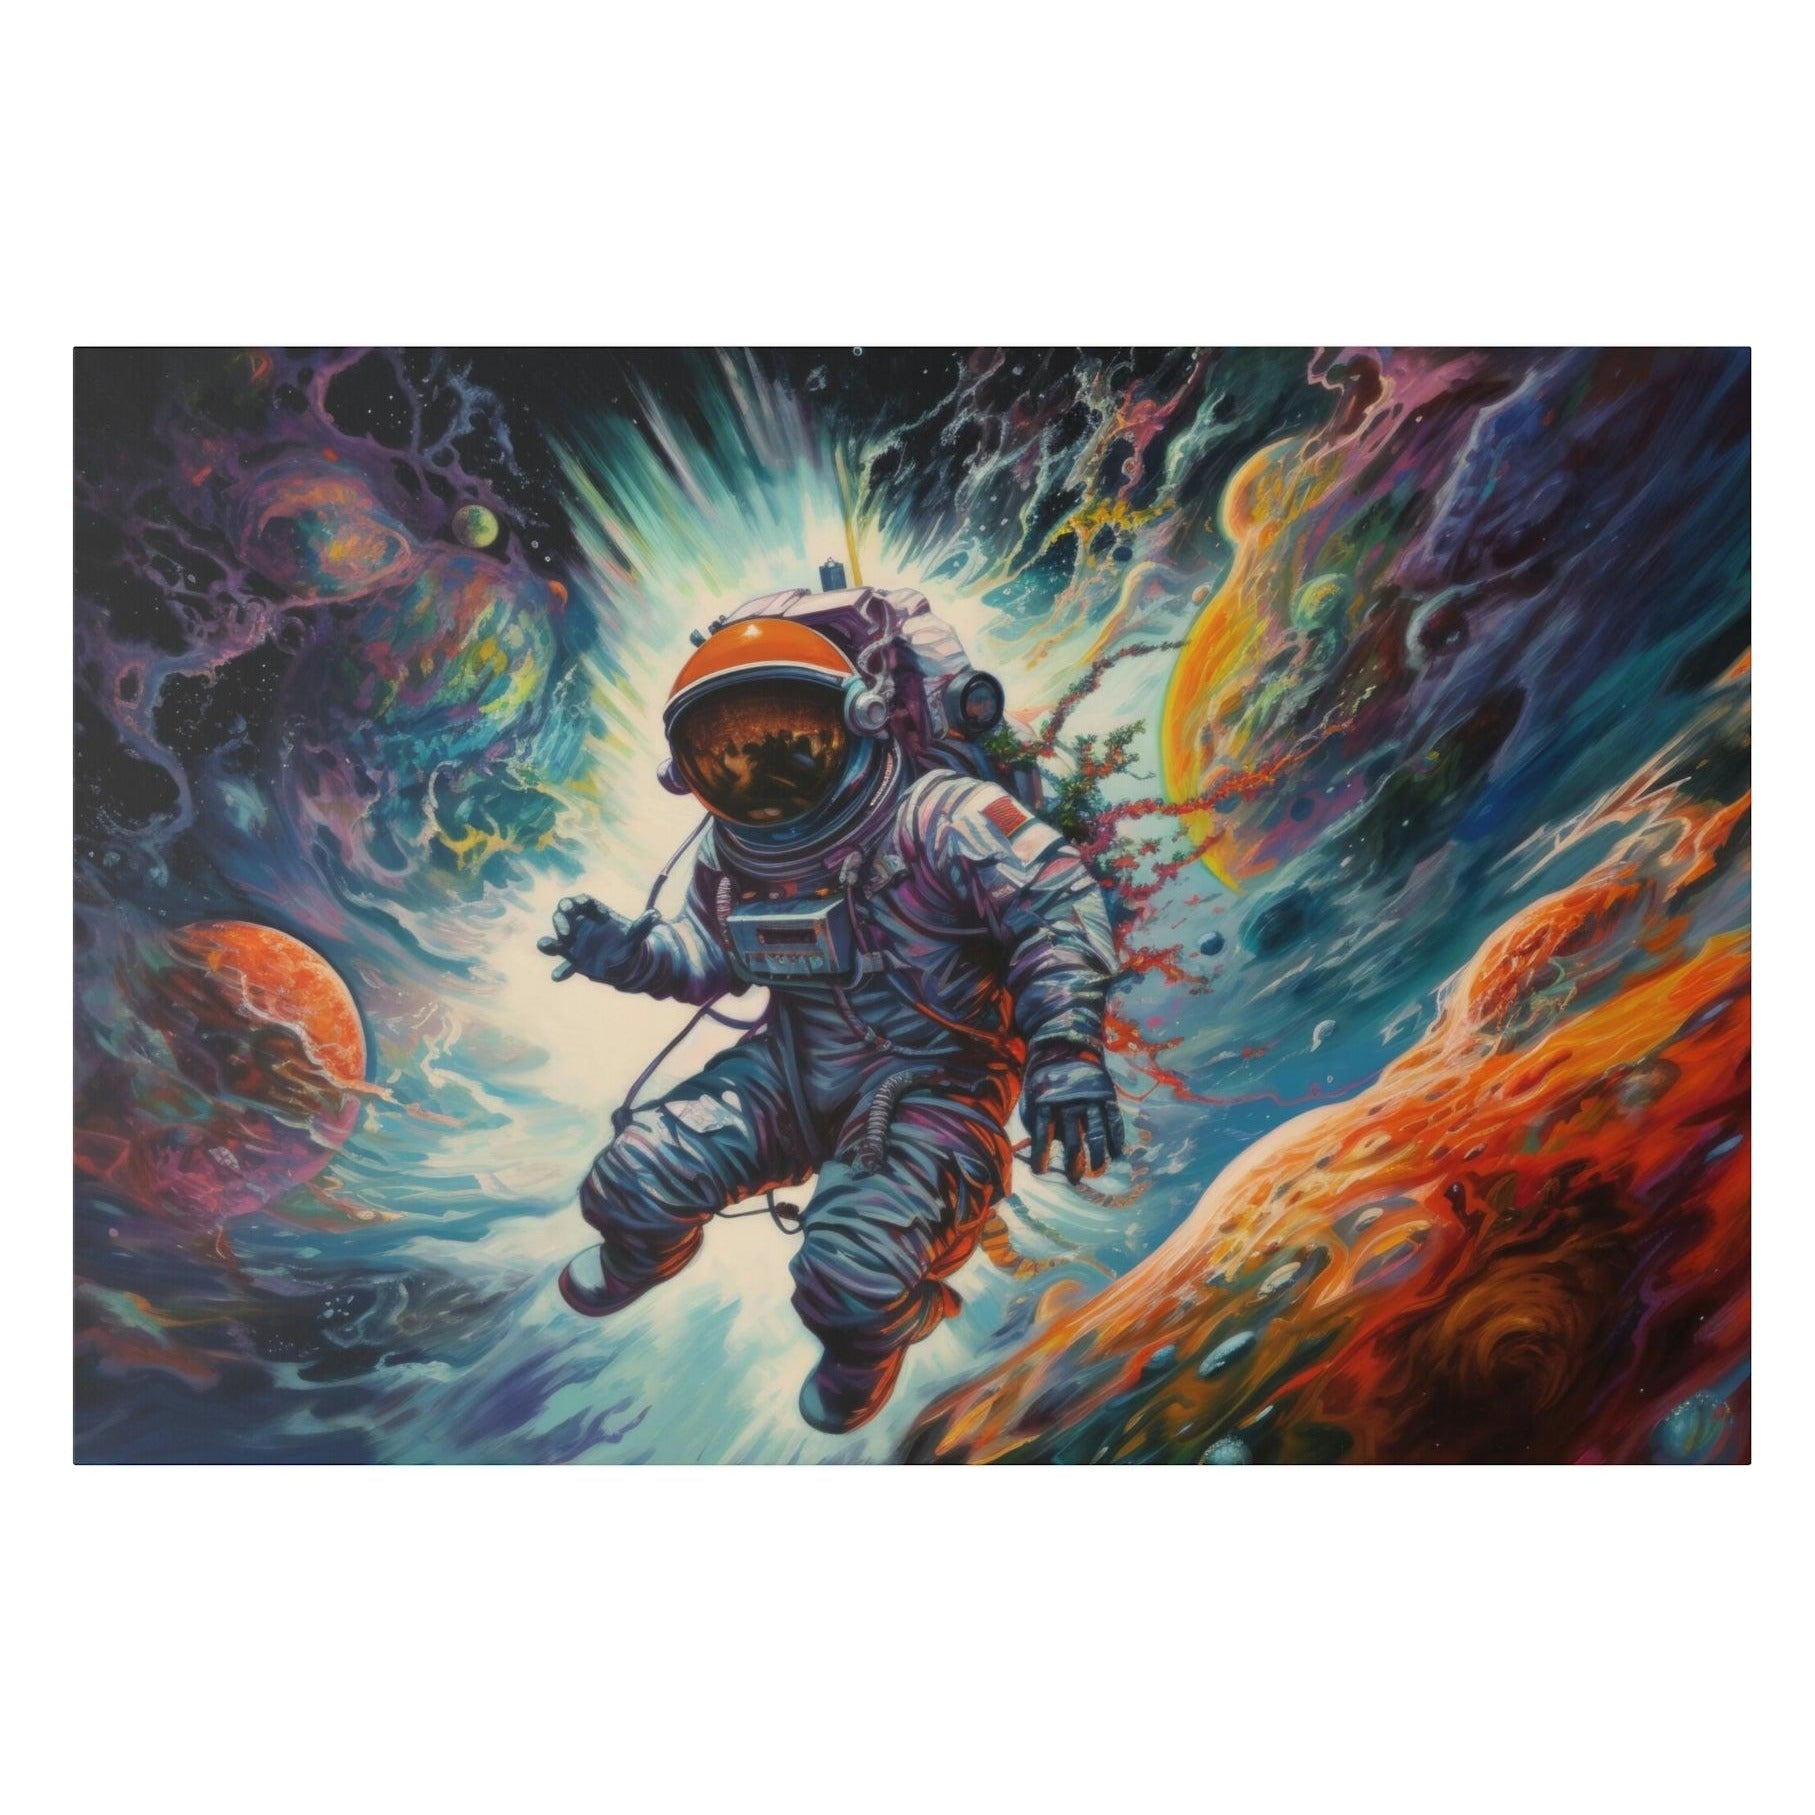 Colorful Space Astronaut 2 Wall Art - Abstract Picture Canvas Print Wall Painting Modern Artwork Wall Art for Living Room Home Office Décor